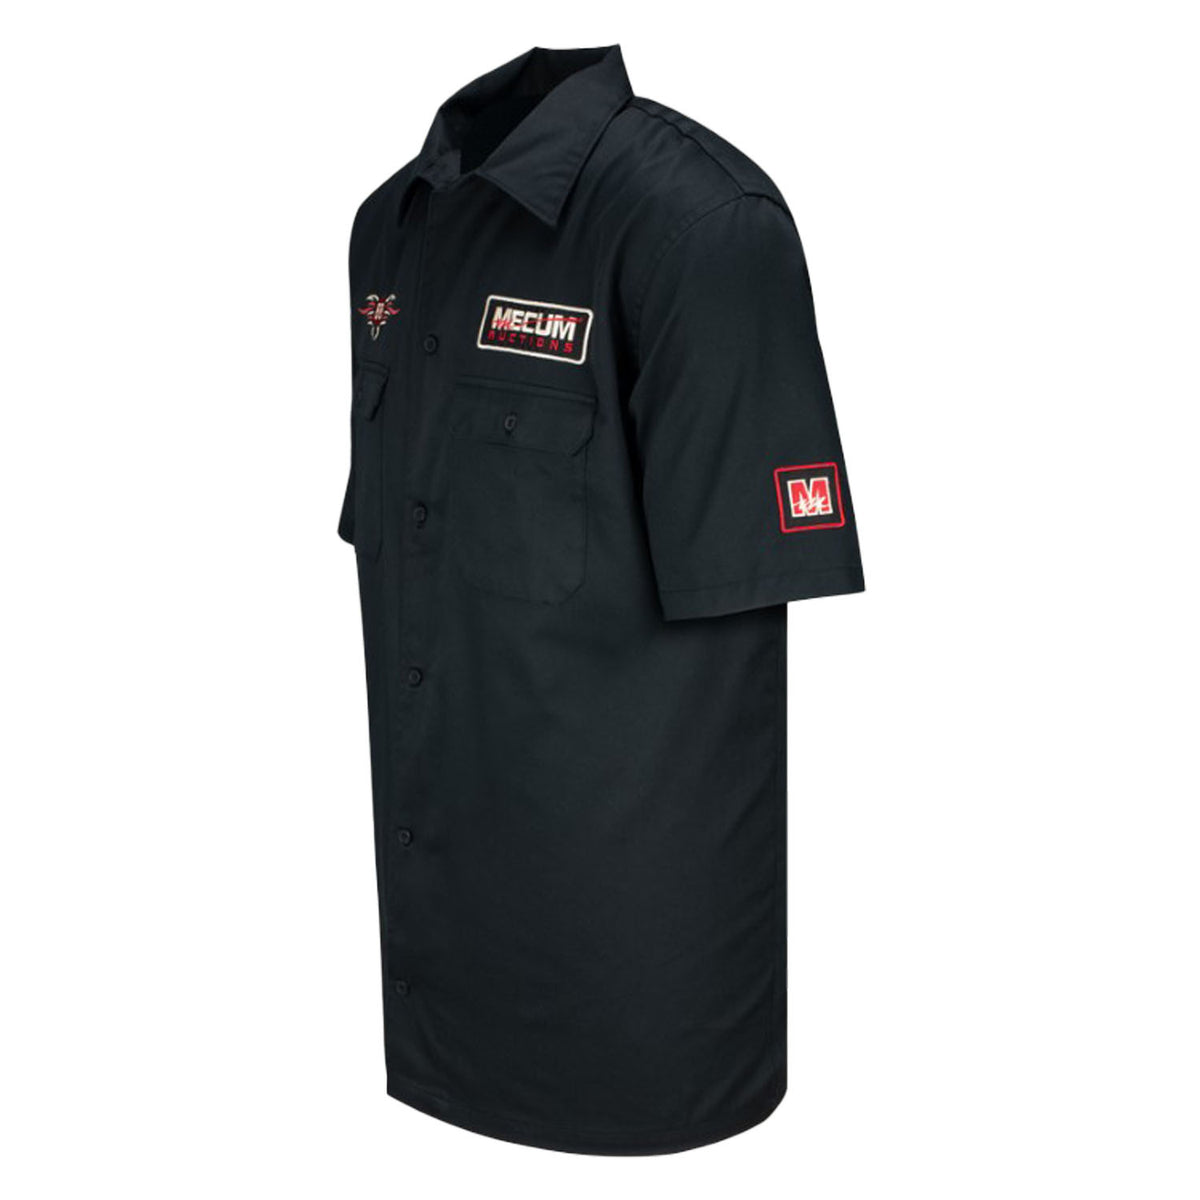 Mecum Auctions Black 1988 Throwback Button Down T-Shirt in Black - Angled Left Side View